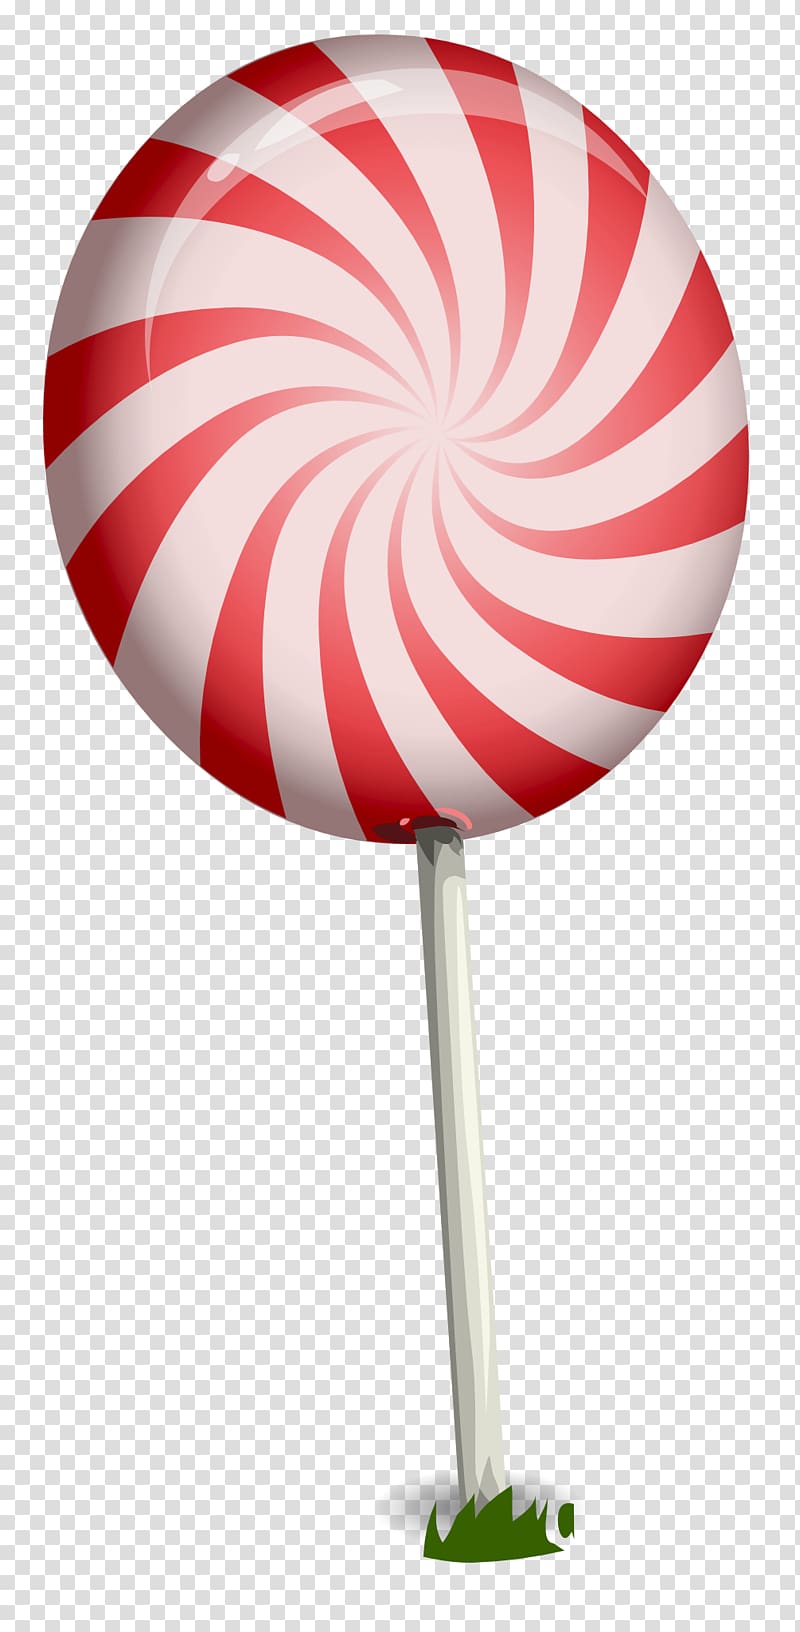 White and red lollipop, Lollipop Stick candy, Candy Lollipop.